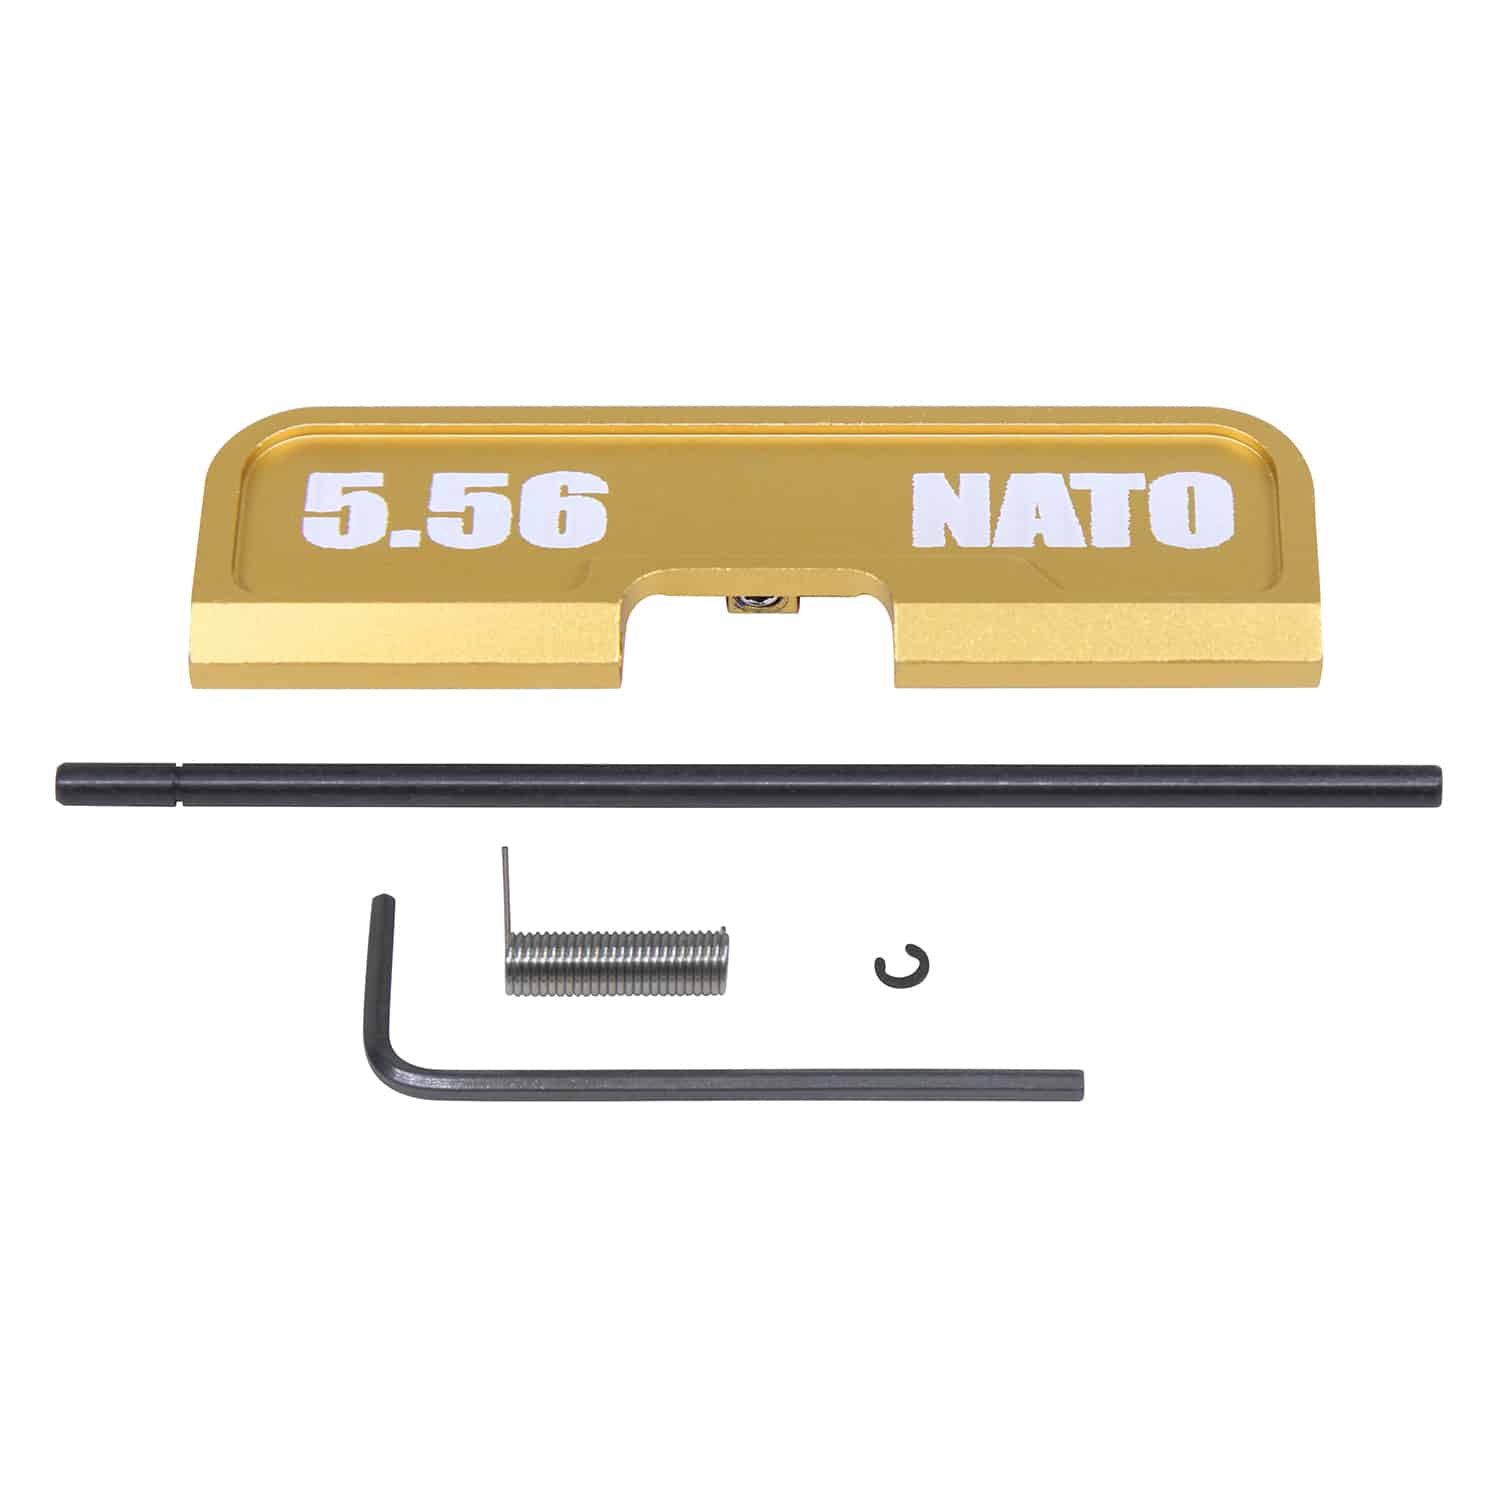 AR-15 Ejection Port Dust Cover Gen 3 '5.56 NATO' Lasered in Anodized Gold